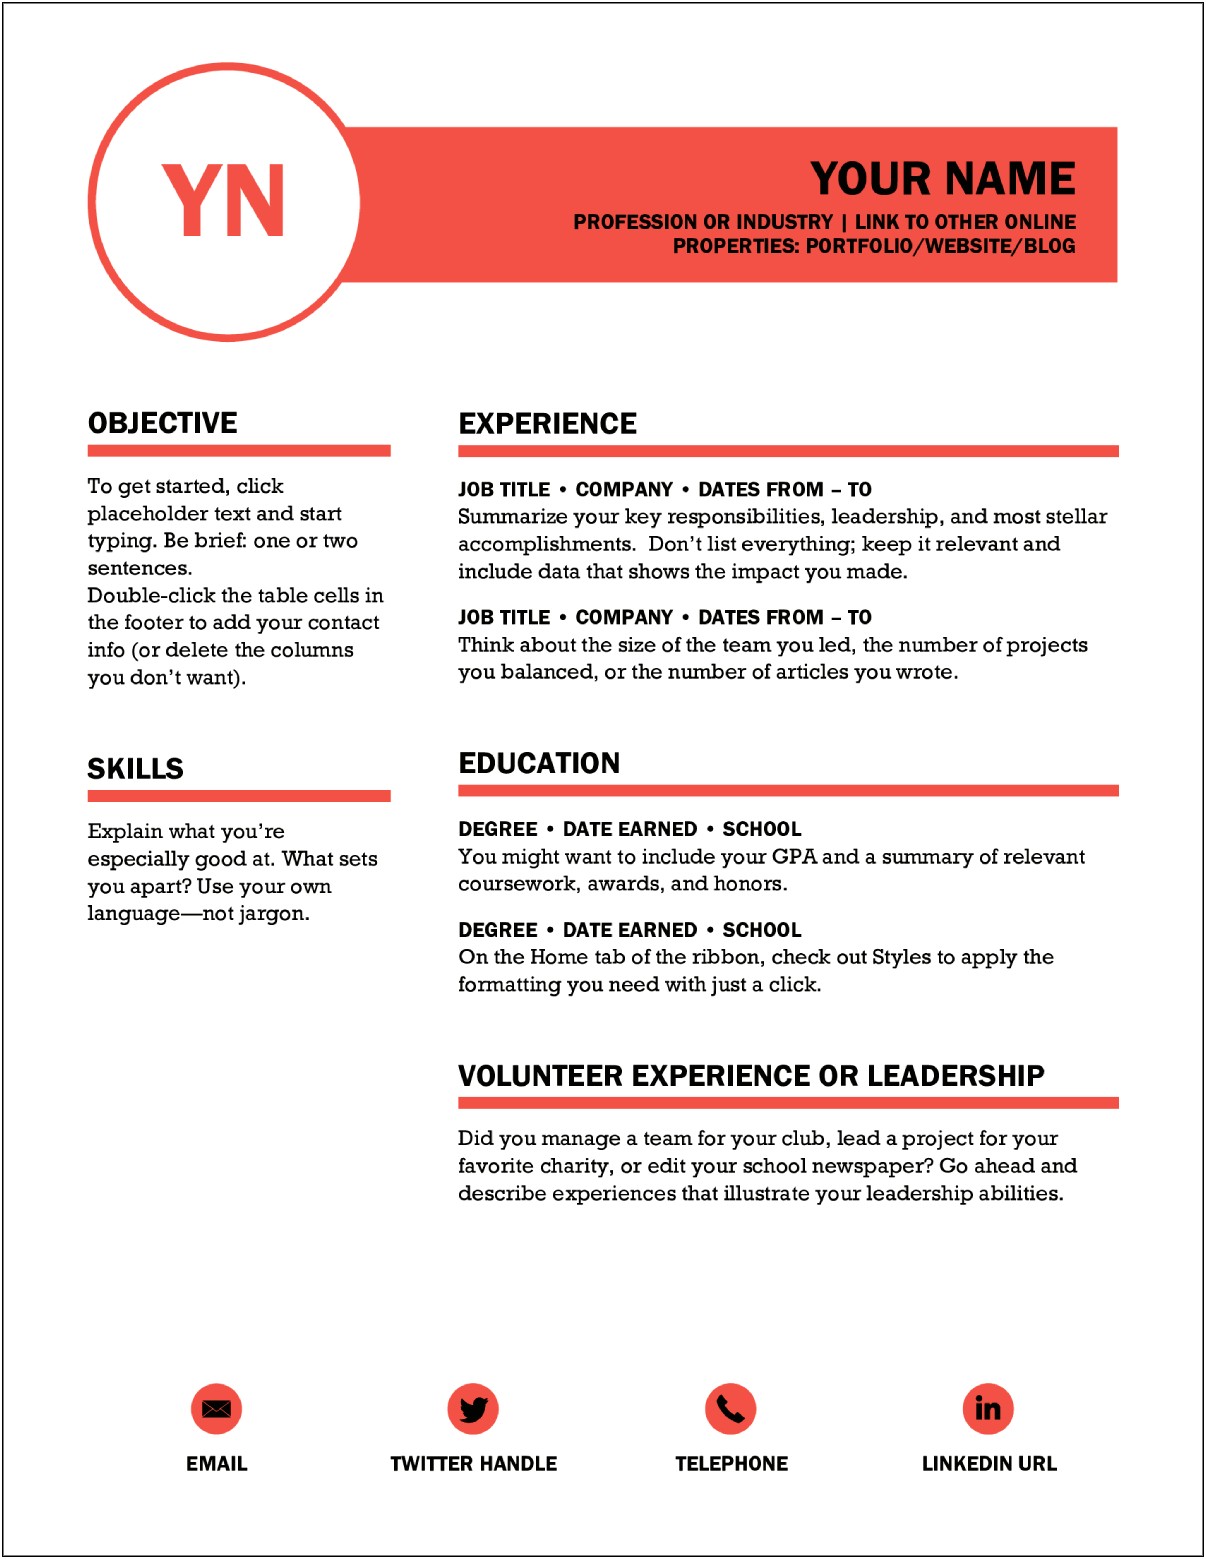 Education For A High School Student In Resume